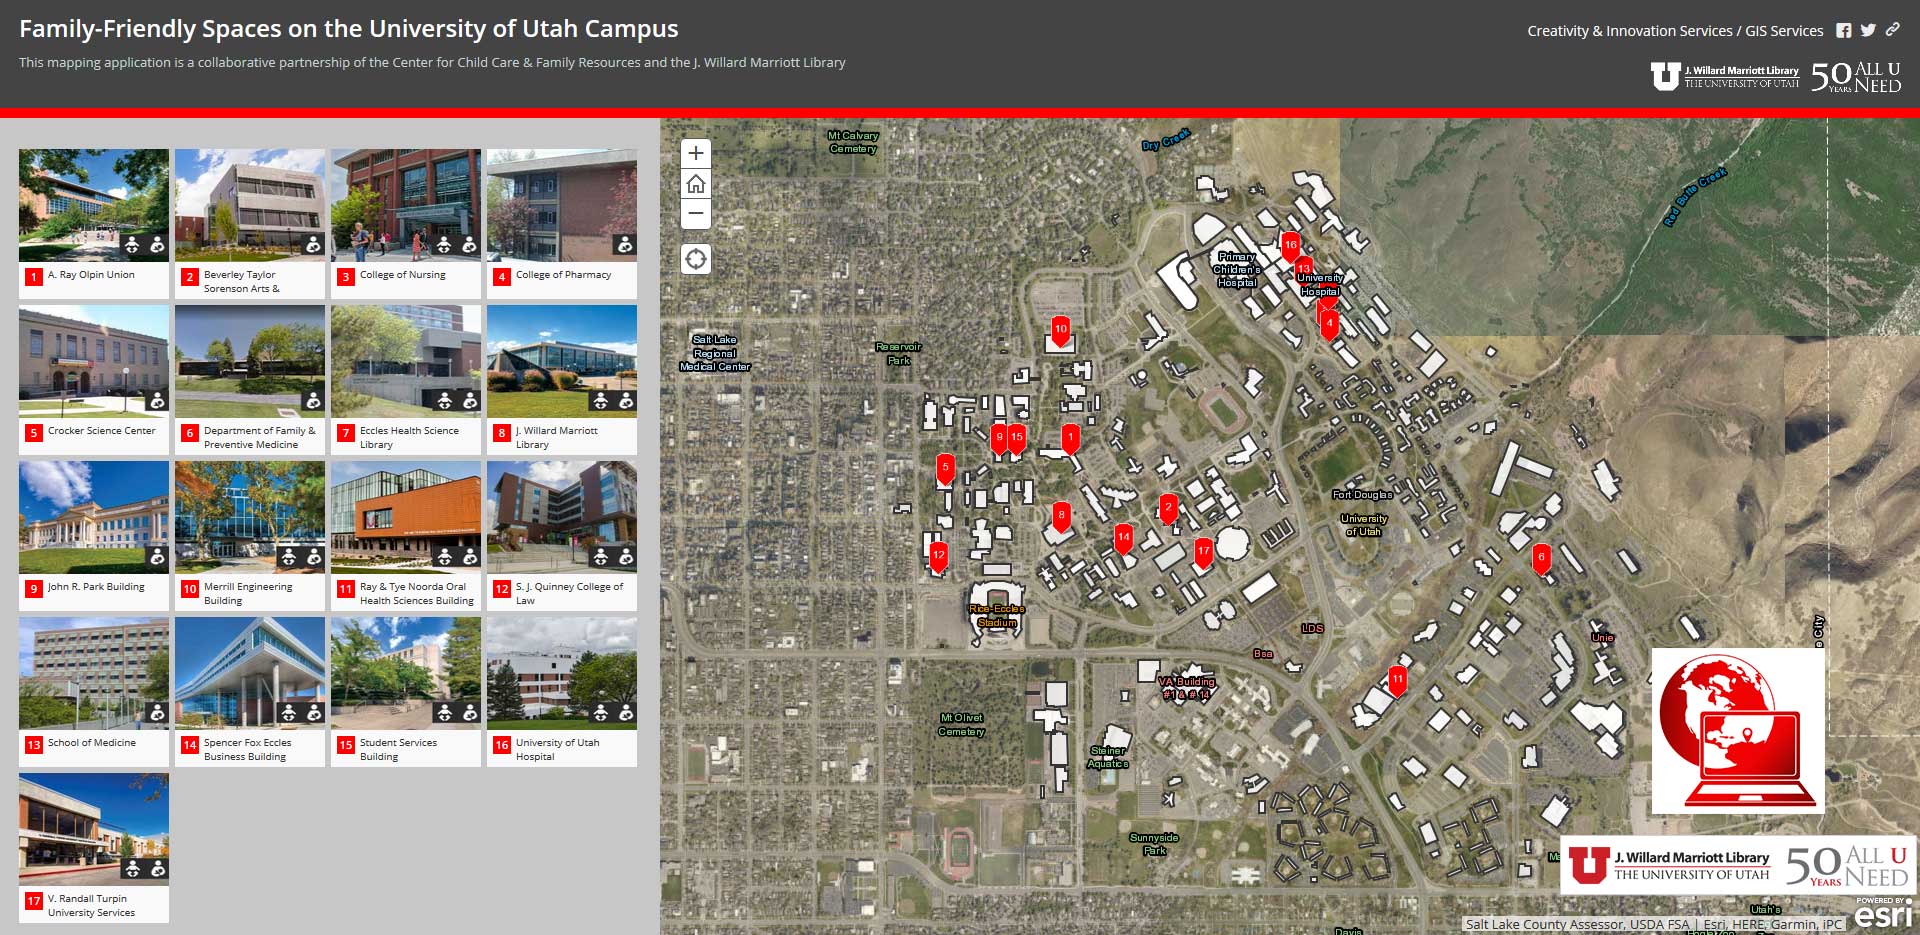 Family-Friendly Spaces of the University of Utah Campus: An interactive map for identifying and visualizing family-friendly space locations across campus.